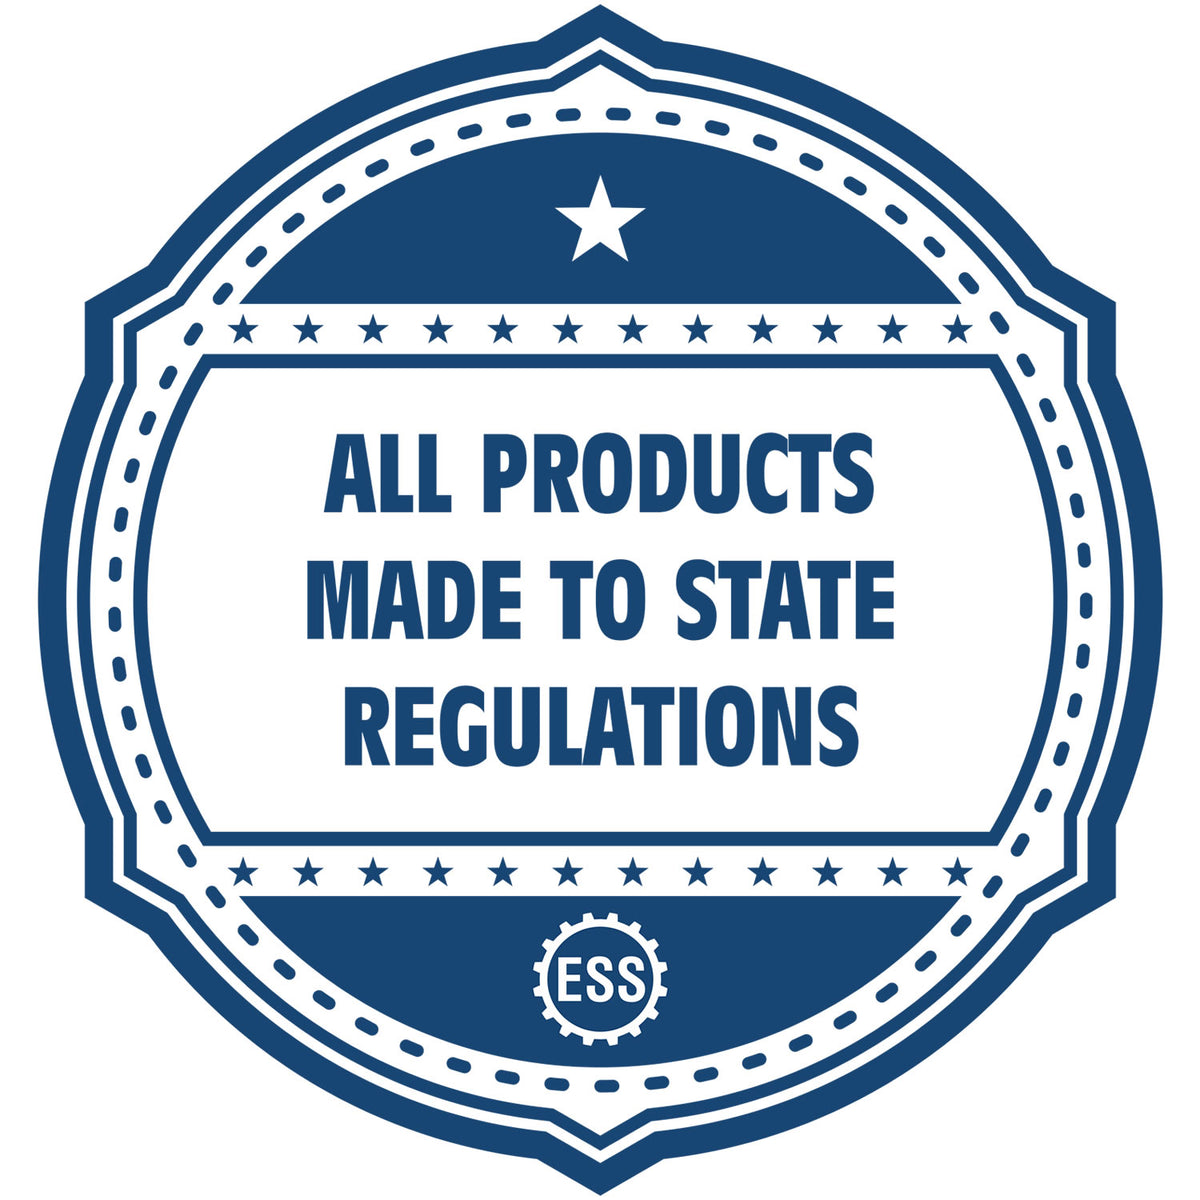 An icon or badge element for the Slim Pre-Inked North Dakota Professional Engineer Seal Stamp showing that this product is made in compliance with state regulations.